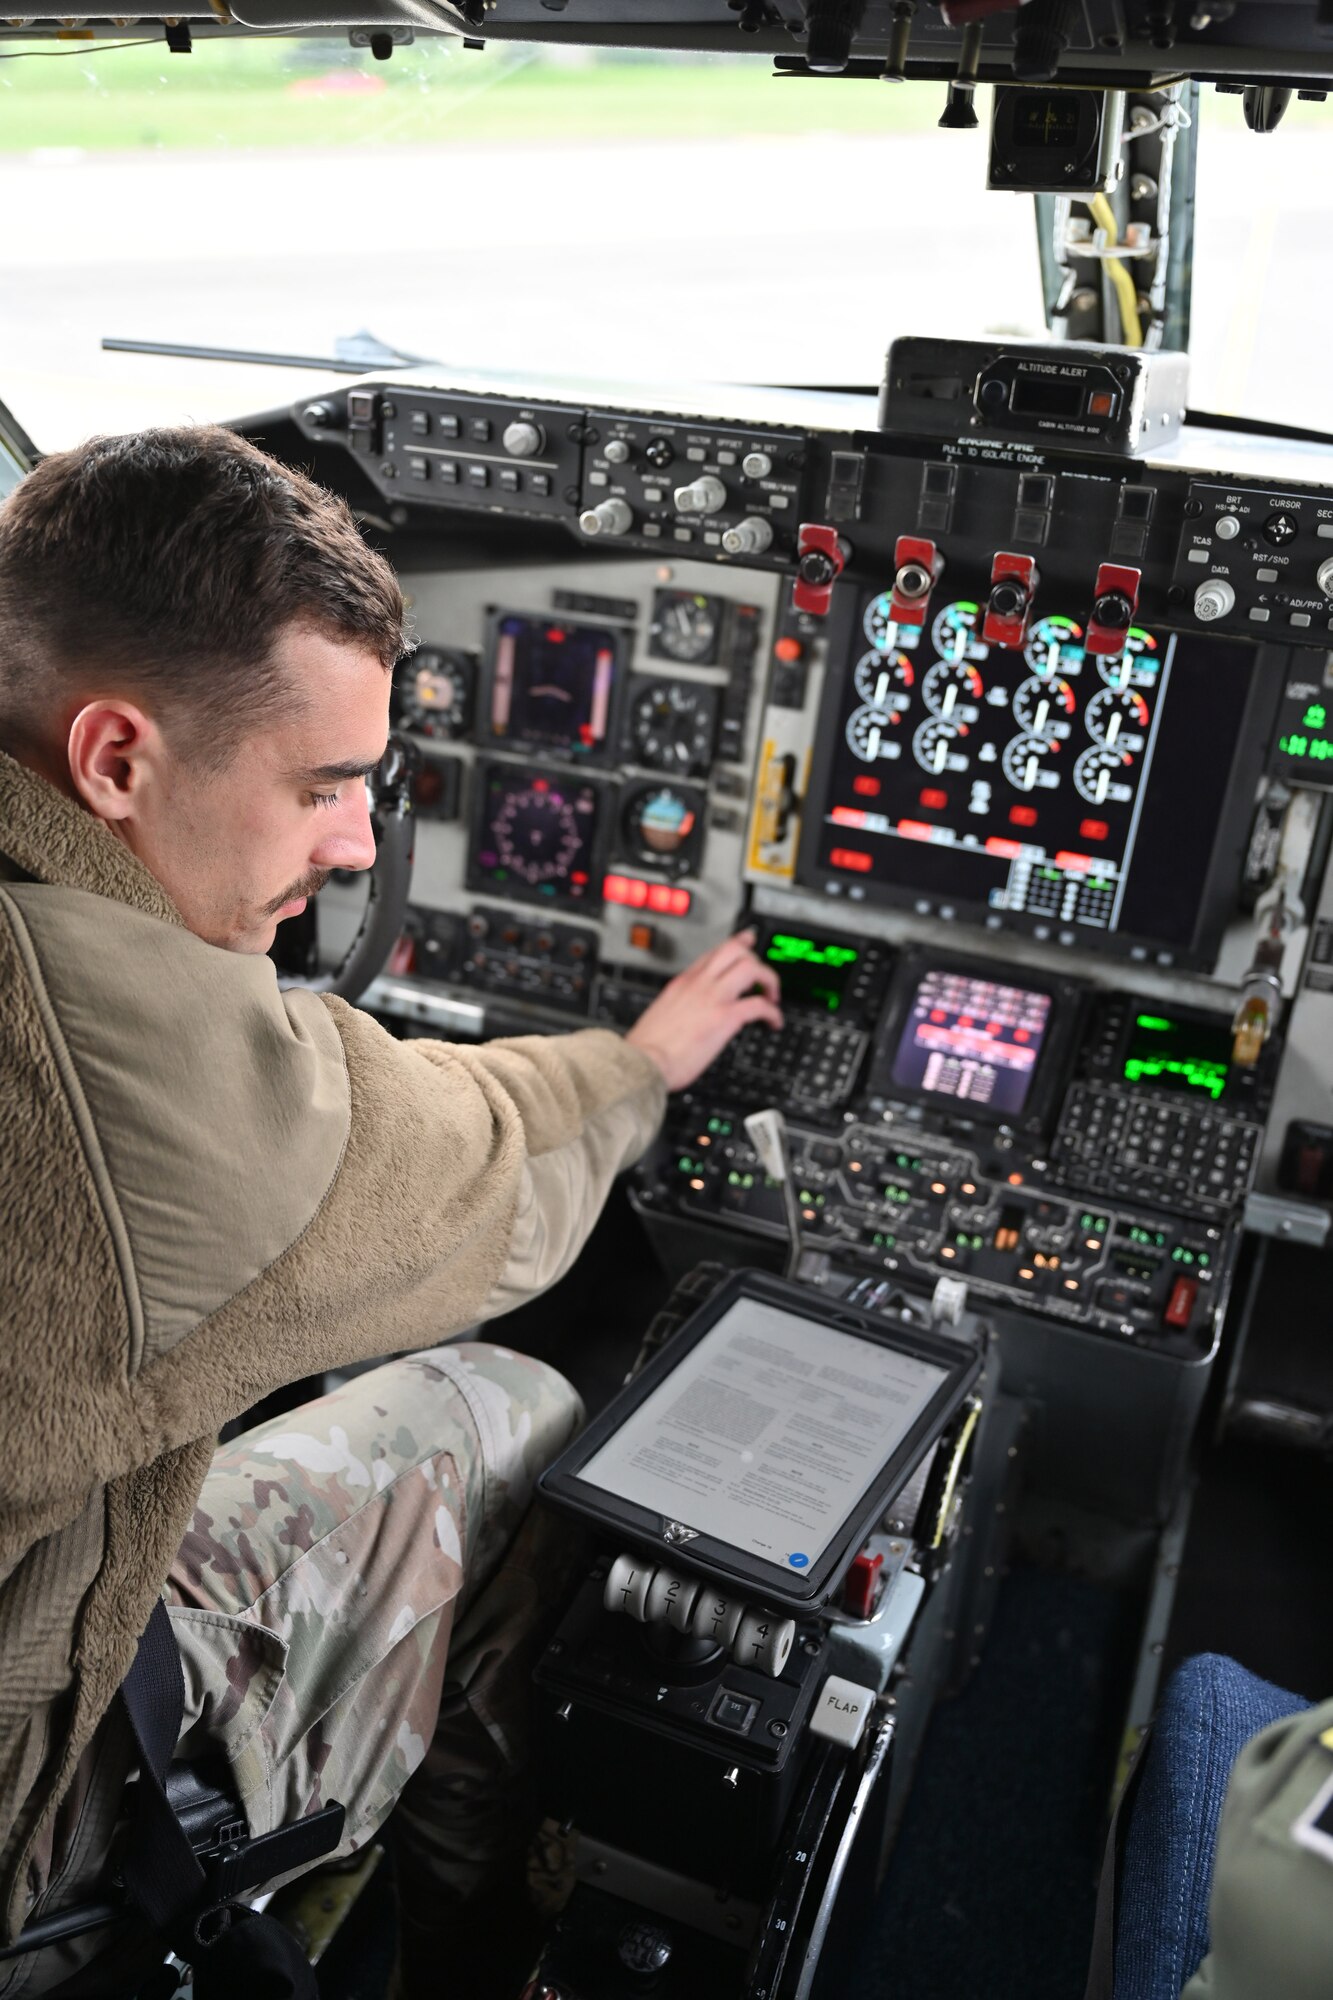 U.S. Air Force Tech. Sgt. Richard Sweeten, 100th Aircraft Maintenance Squadron NCO in charge of avionics, performs systems and operational checks while troubleshooting the Real-Time Information in the Cockpit system (more commonly known as “RTIC”) on a KC-135 Stratotanker at Royal Air Force Mildenhall, England, Oct. 18, 2023. The newly installed communications system gives aircrew the ability to access vital information including threats, target data and locations of friendly forces, providing even more accurate and instant information. (U.S. Air Force photo by Karen Abeyasekere)